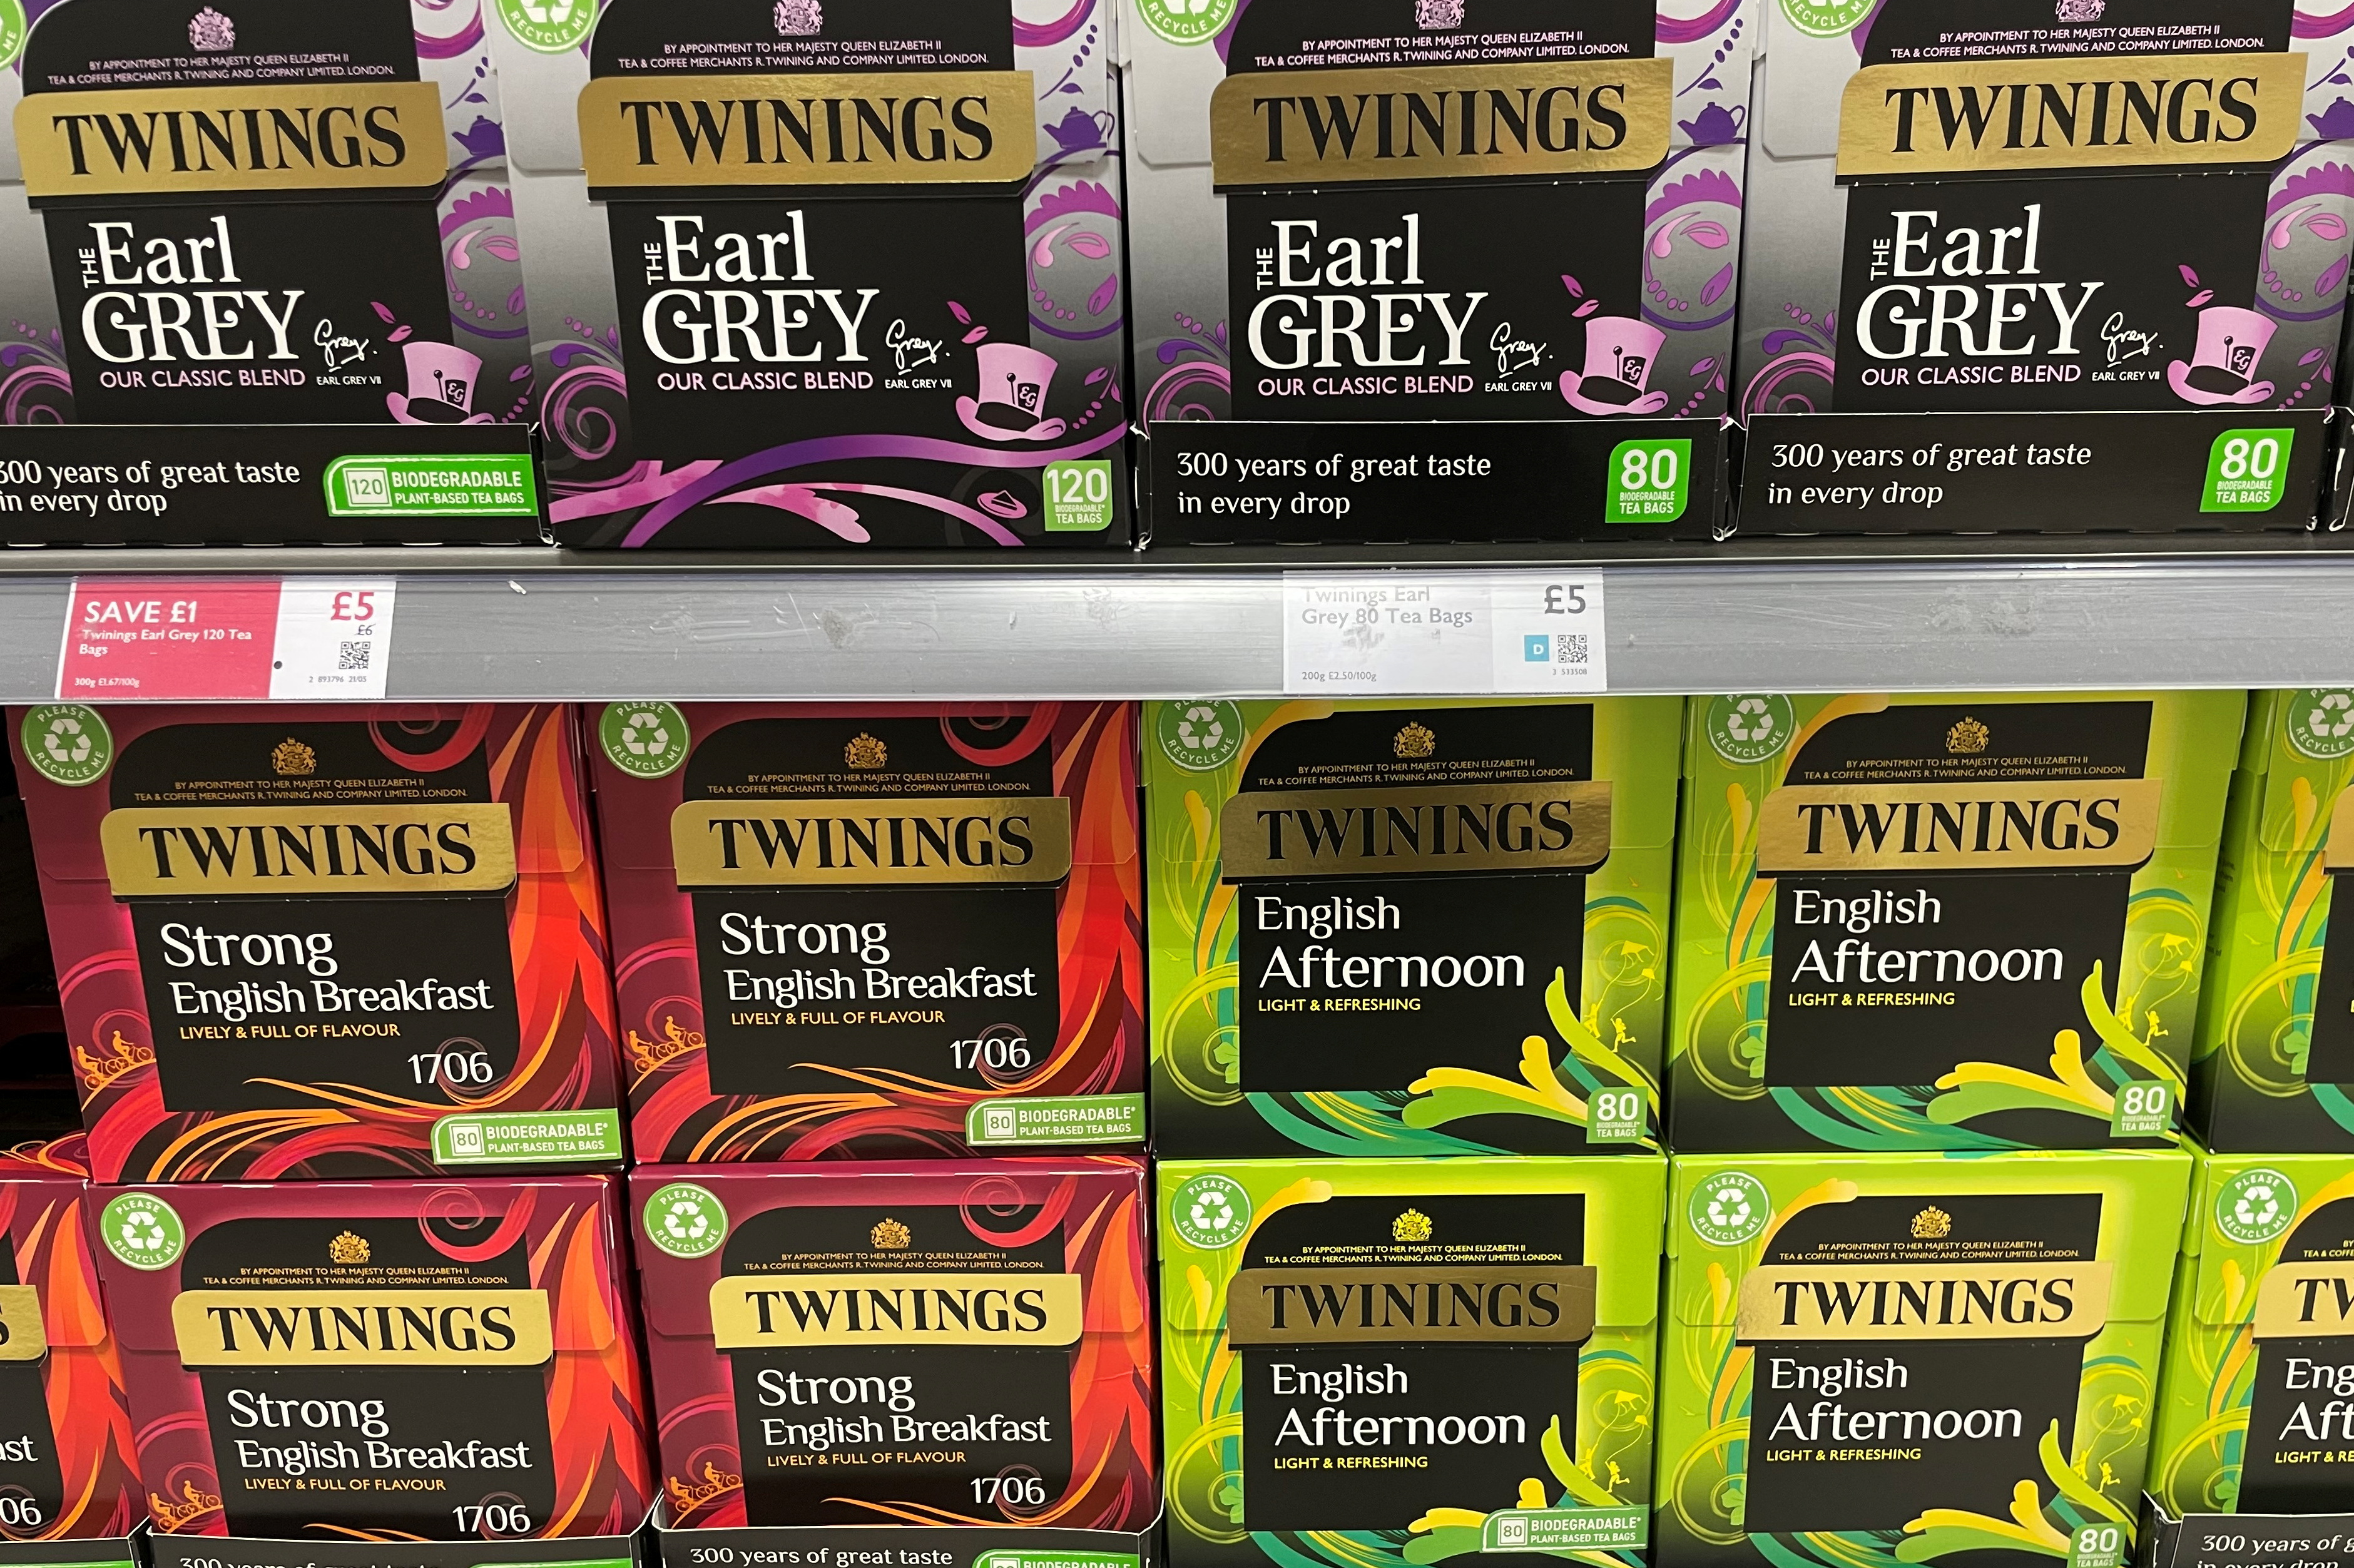 Twinings tea boxes are displayed in London